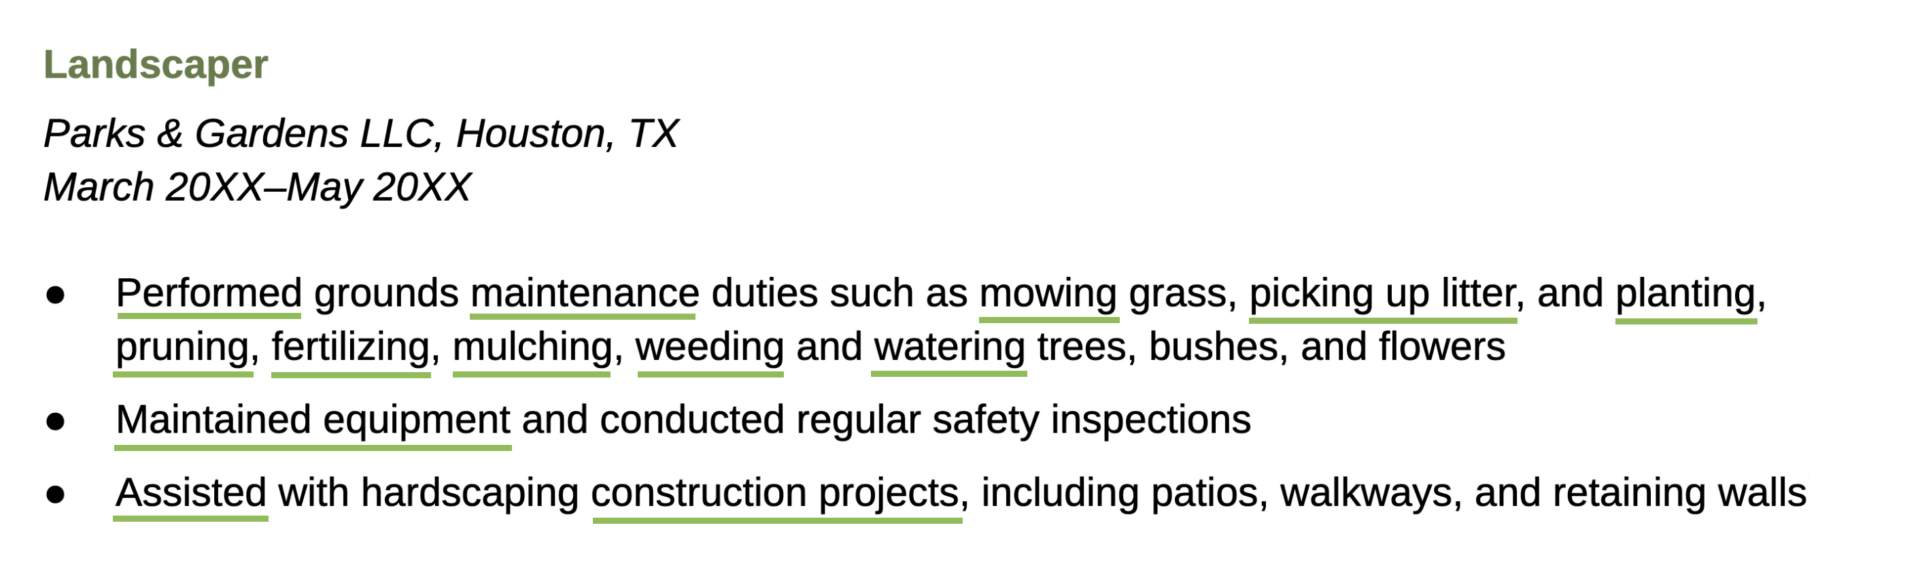 A list of job responsibilities from the work experience section of a landscaping resume.